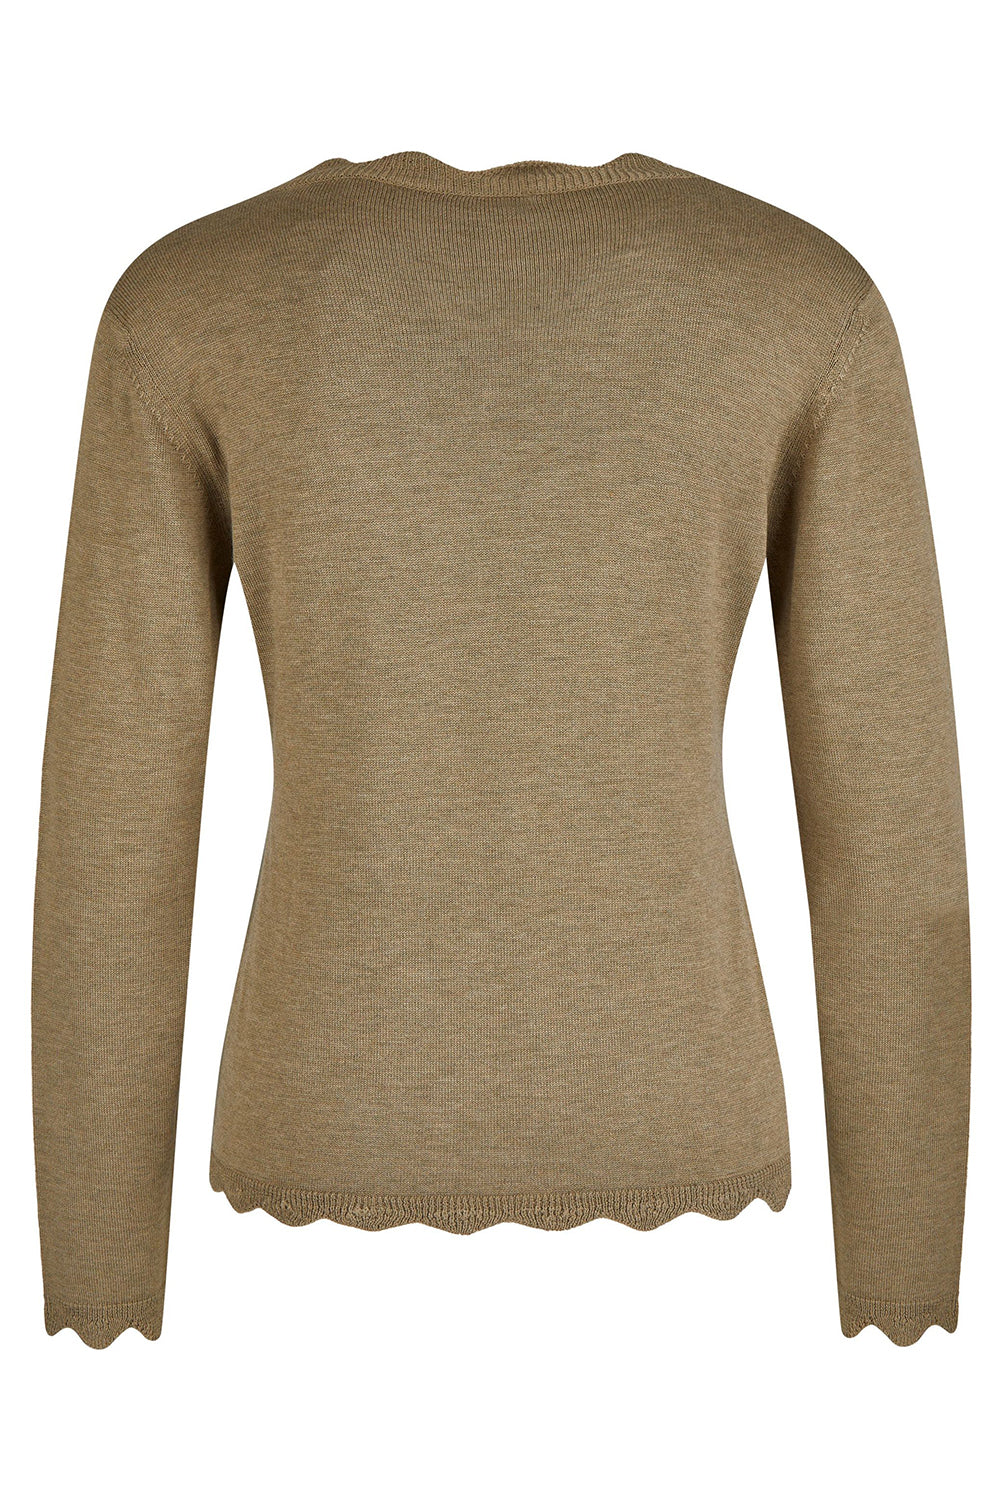 Women's knitted sweater Penny